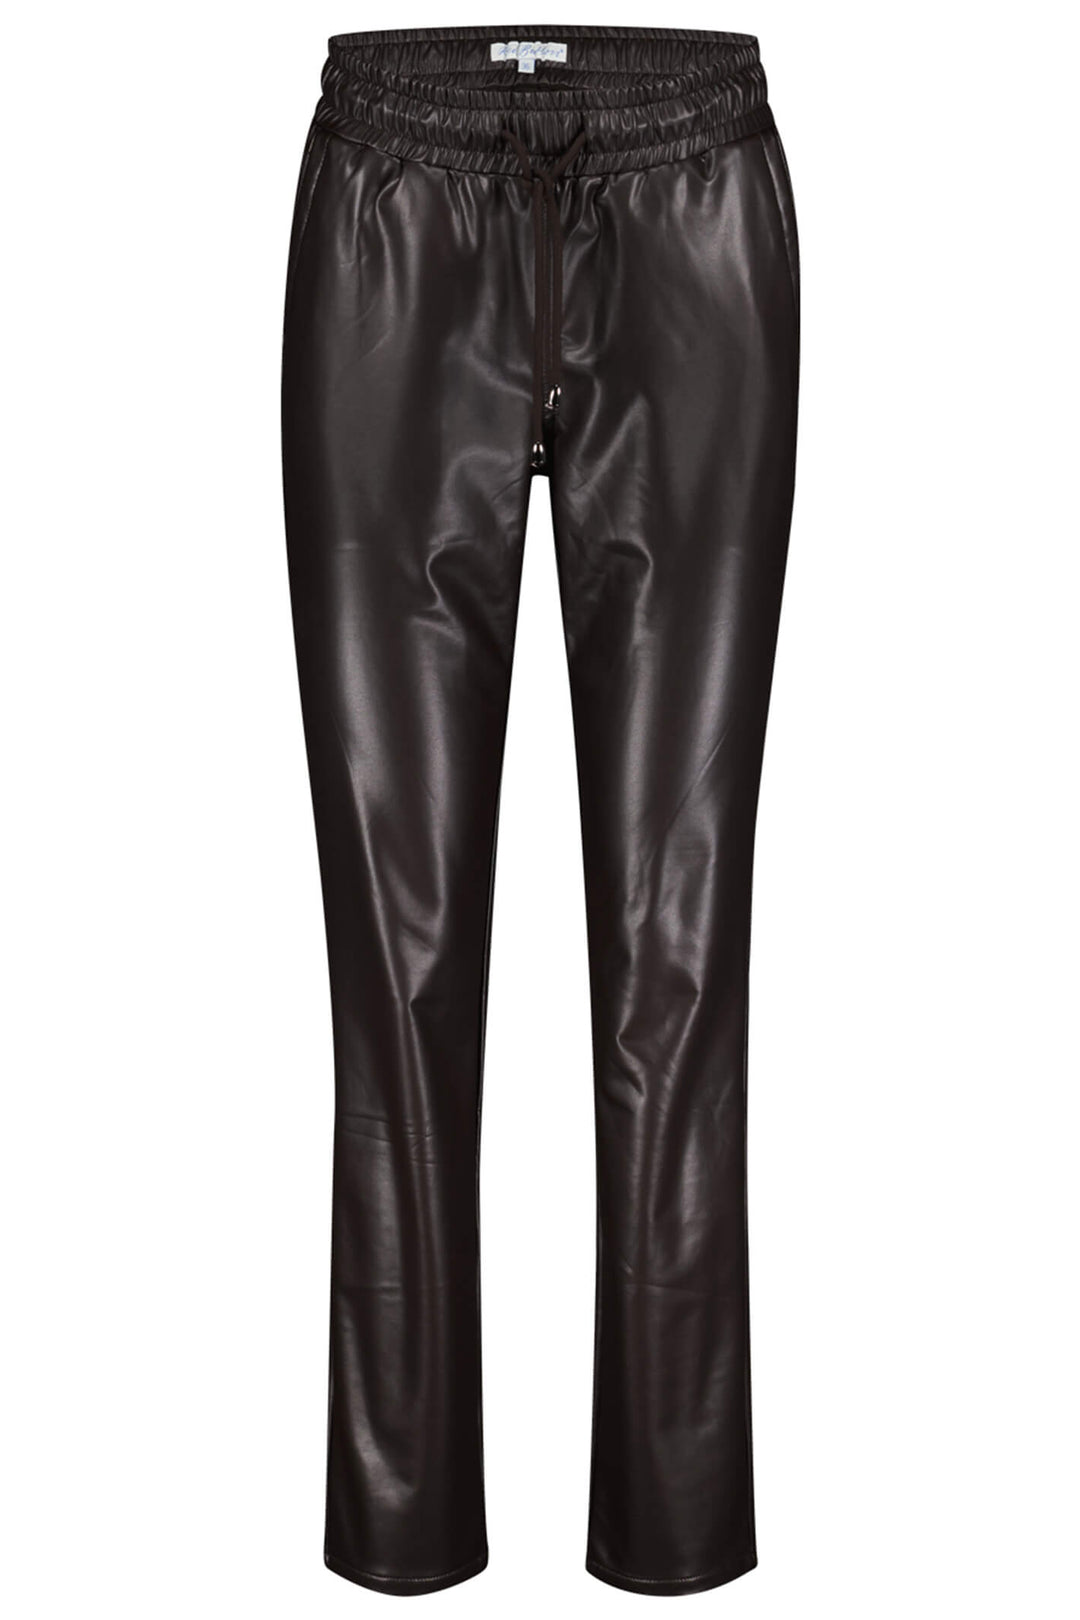 Red Button SRB4094 Tessy Chocolate Brown Faux Leather Trousers - Olivia Grace Fashion